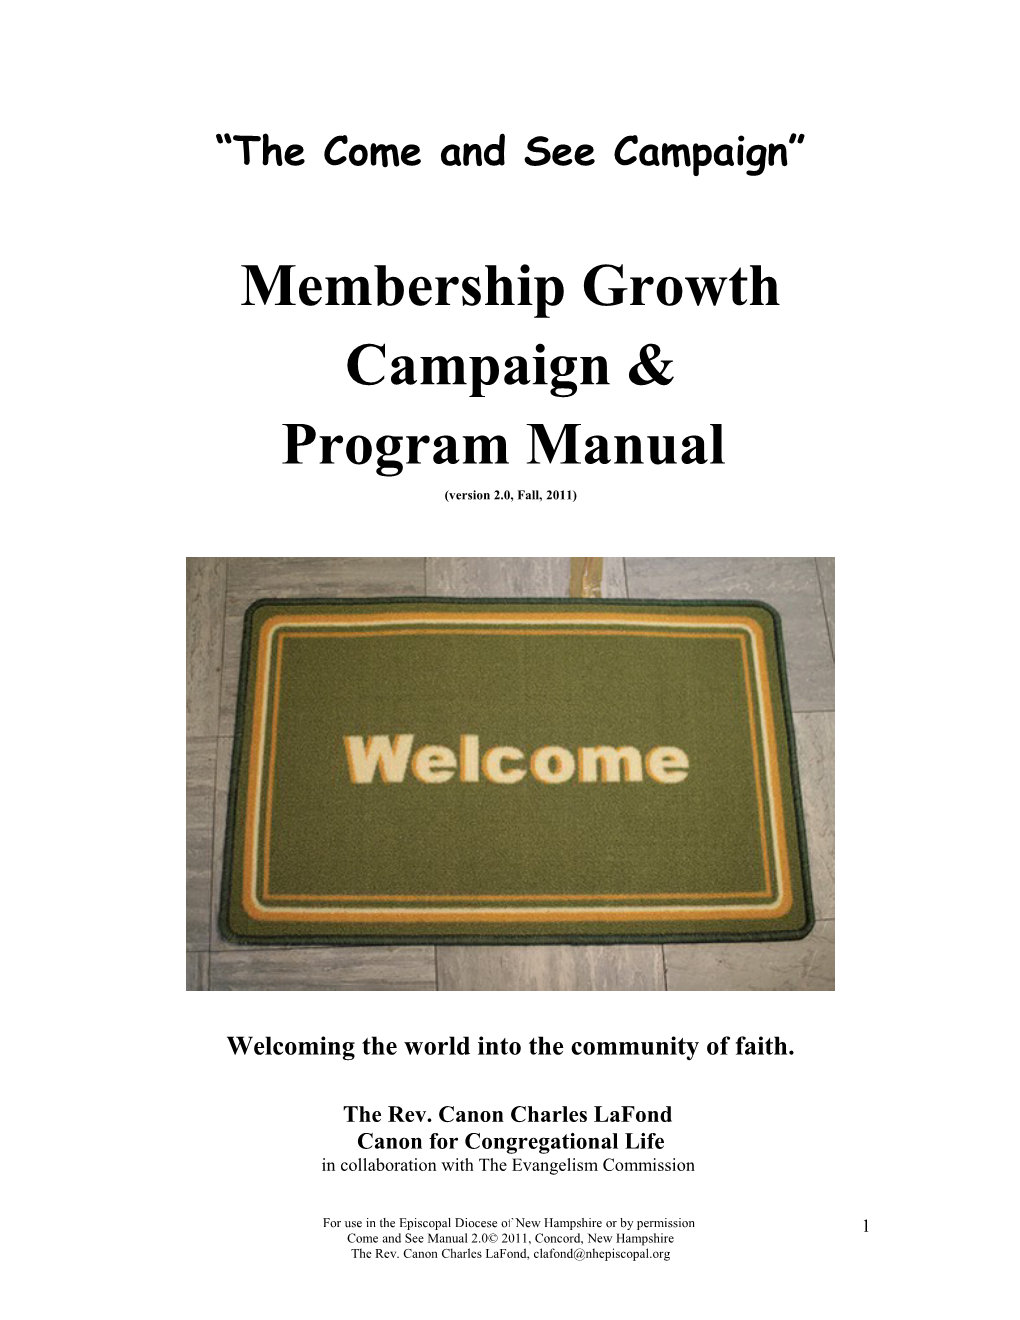 The Come and See Membership Growth Program Manual